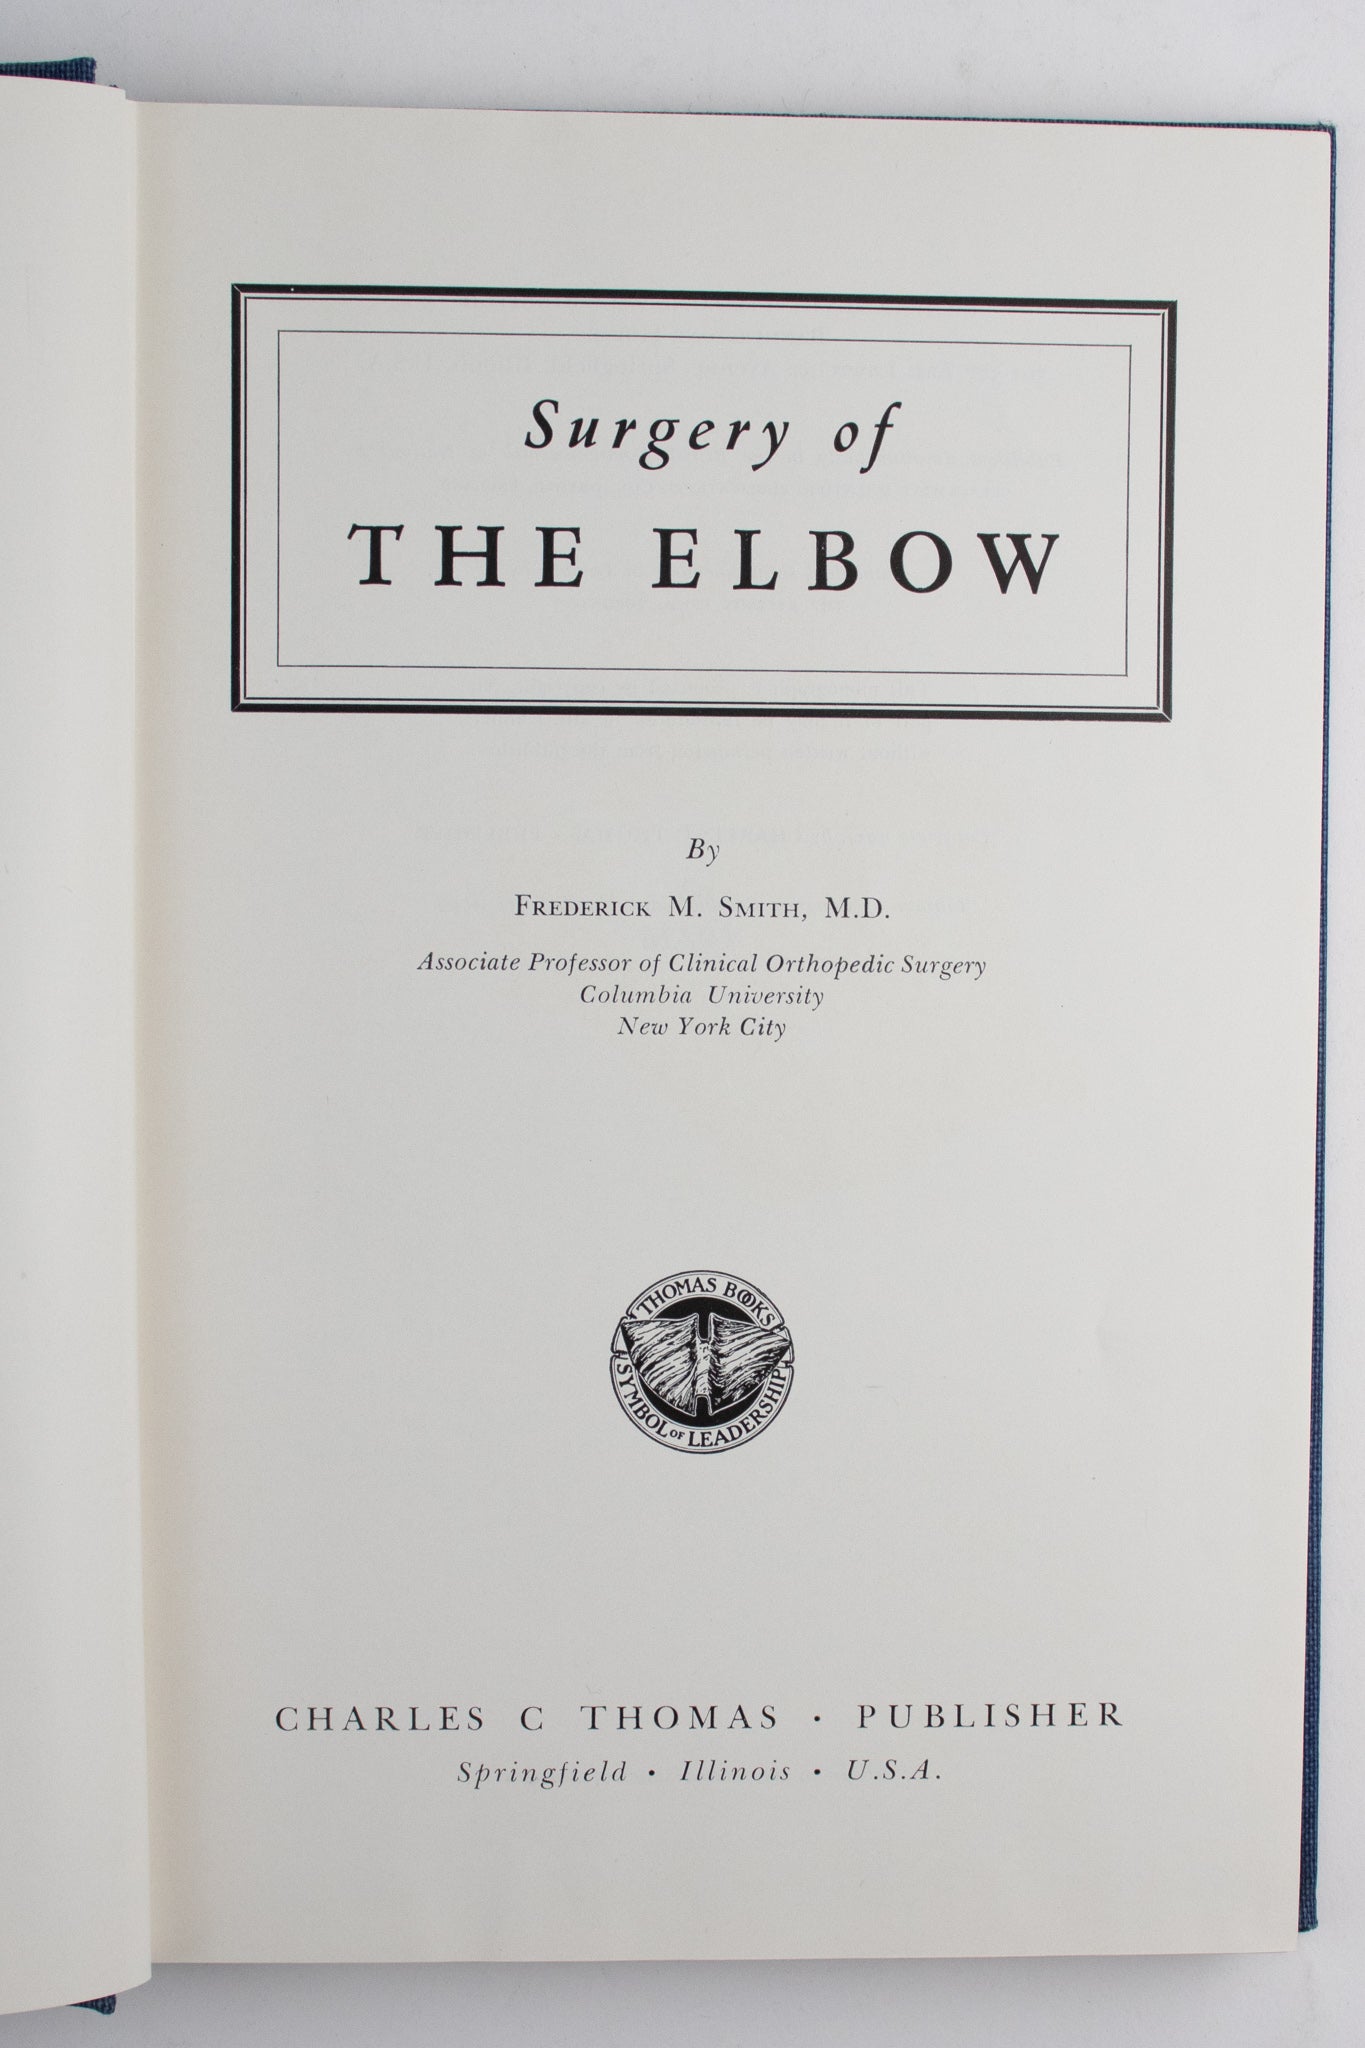 Surgery of the Elbow - Stemcell Science Shop